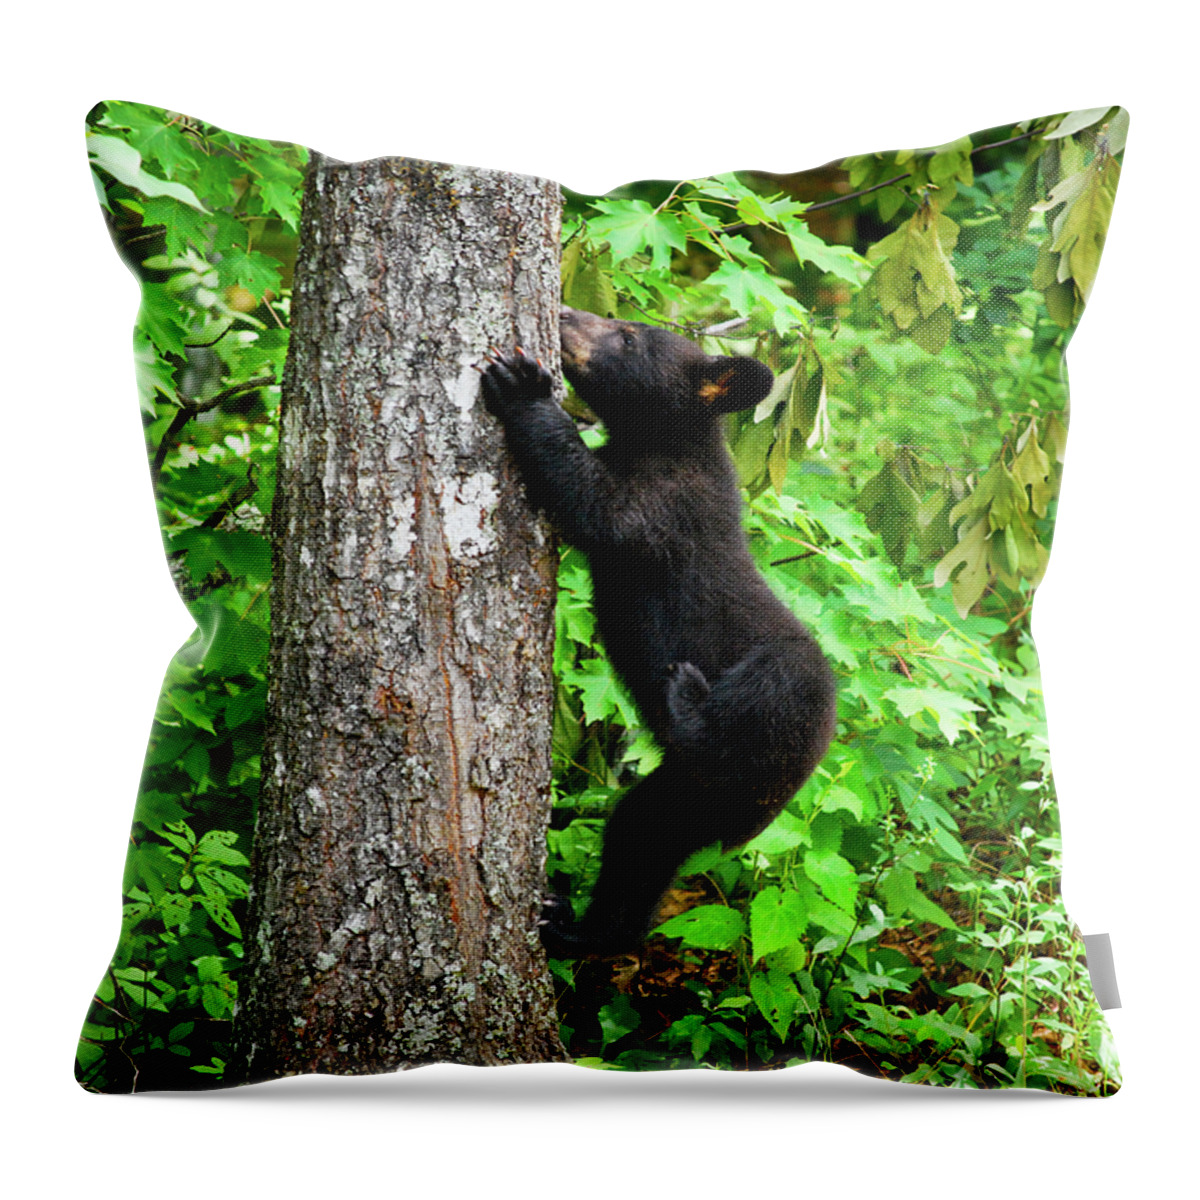 Baby Throw Pillow featuring the photograph Itchy Baby by Christi Kraft